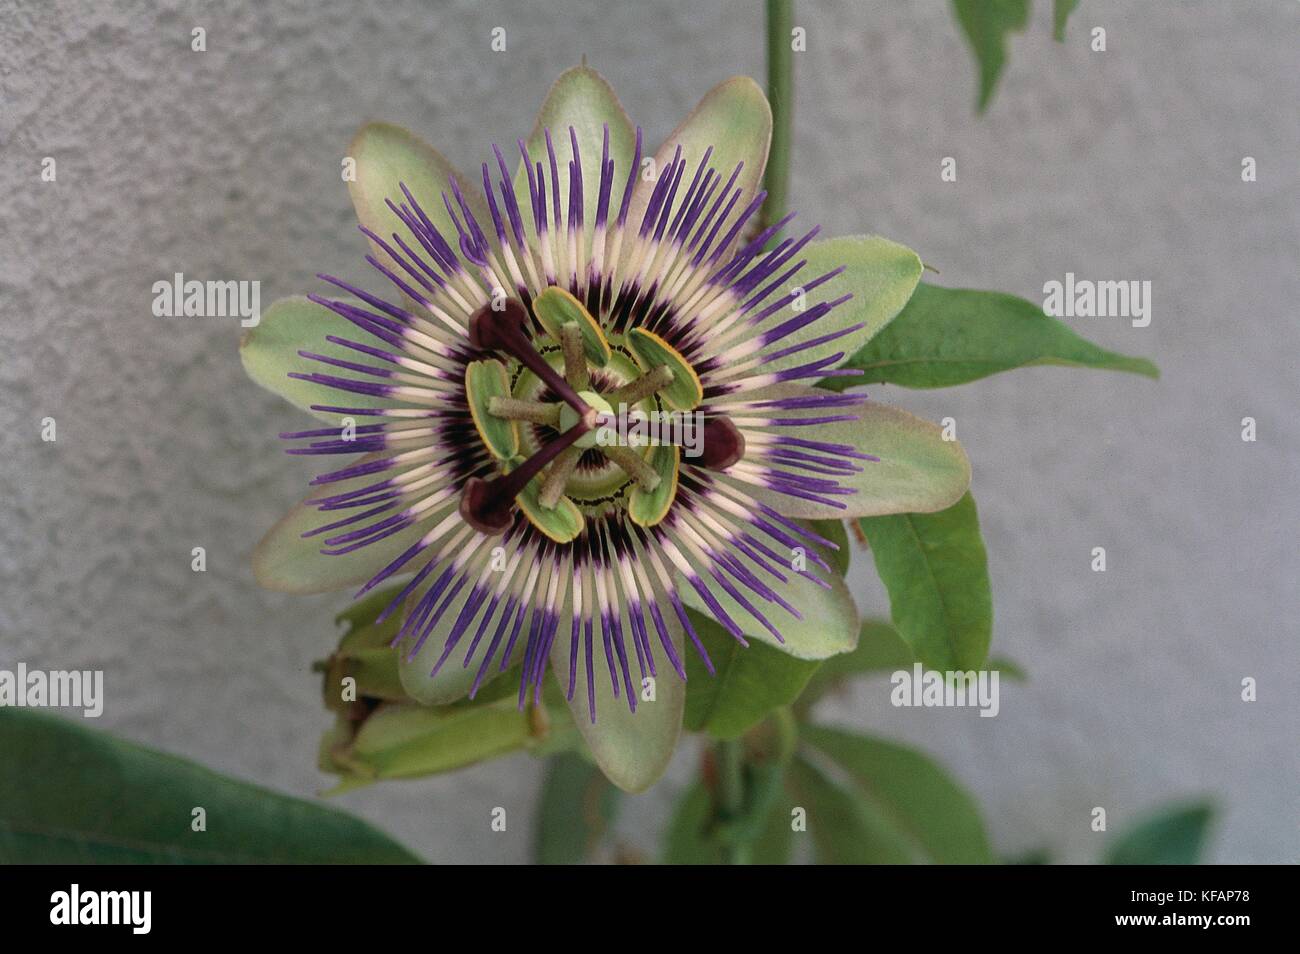 Botany, Passifloracee, Passionflower, inflorescence. Stock Photo